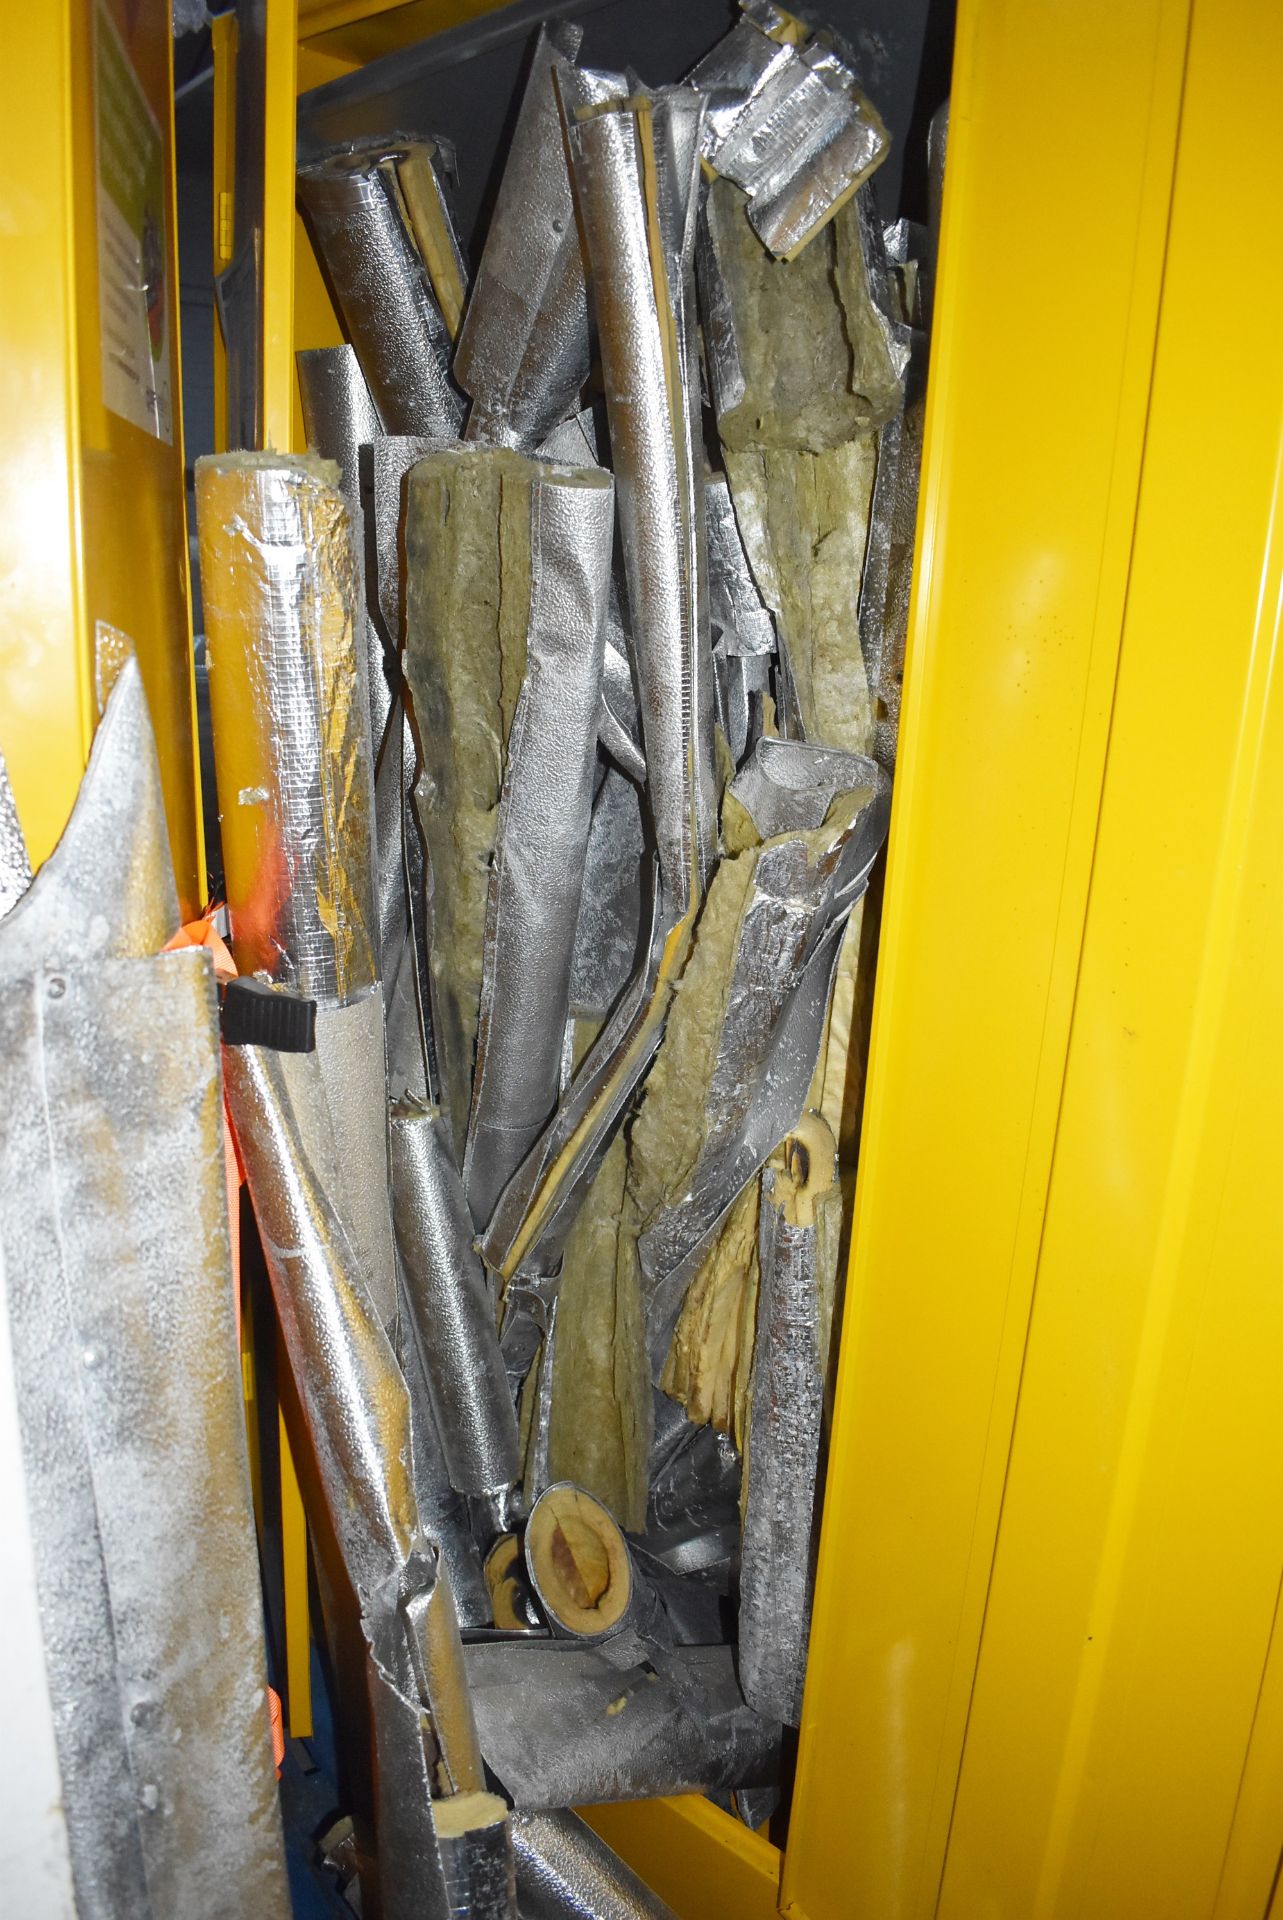 Large Quantity of Thermal Pipe Covering Contents of Two Upright Cabinets - Cabinets Not Included - - Image 2 of 10